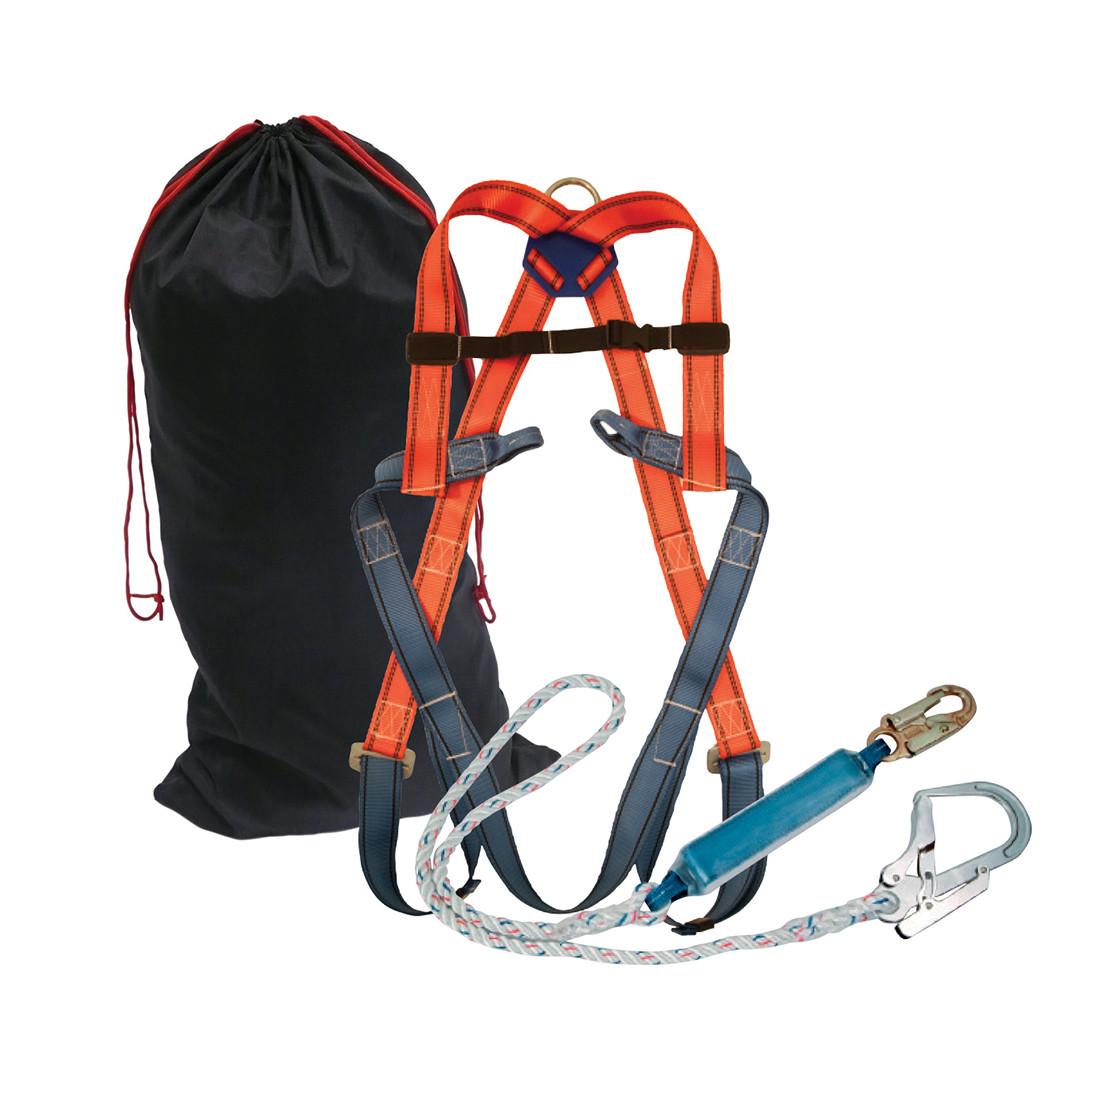 Fall Arrest Kit - Personal protection